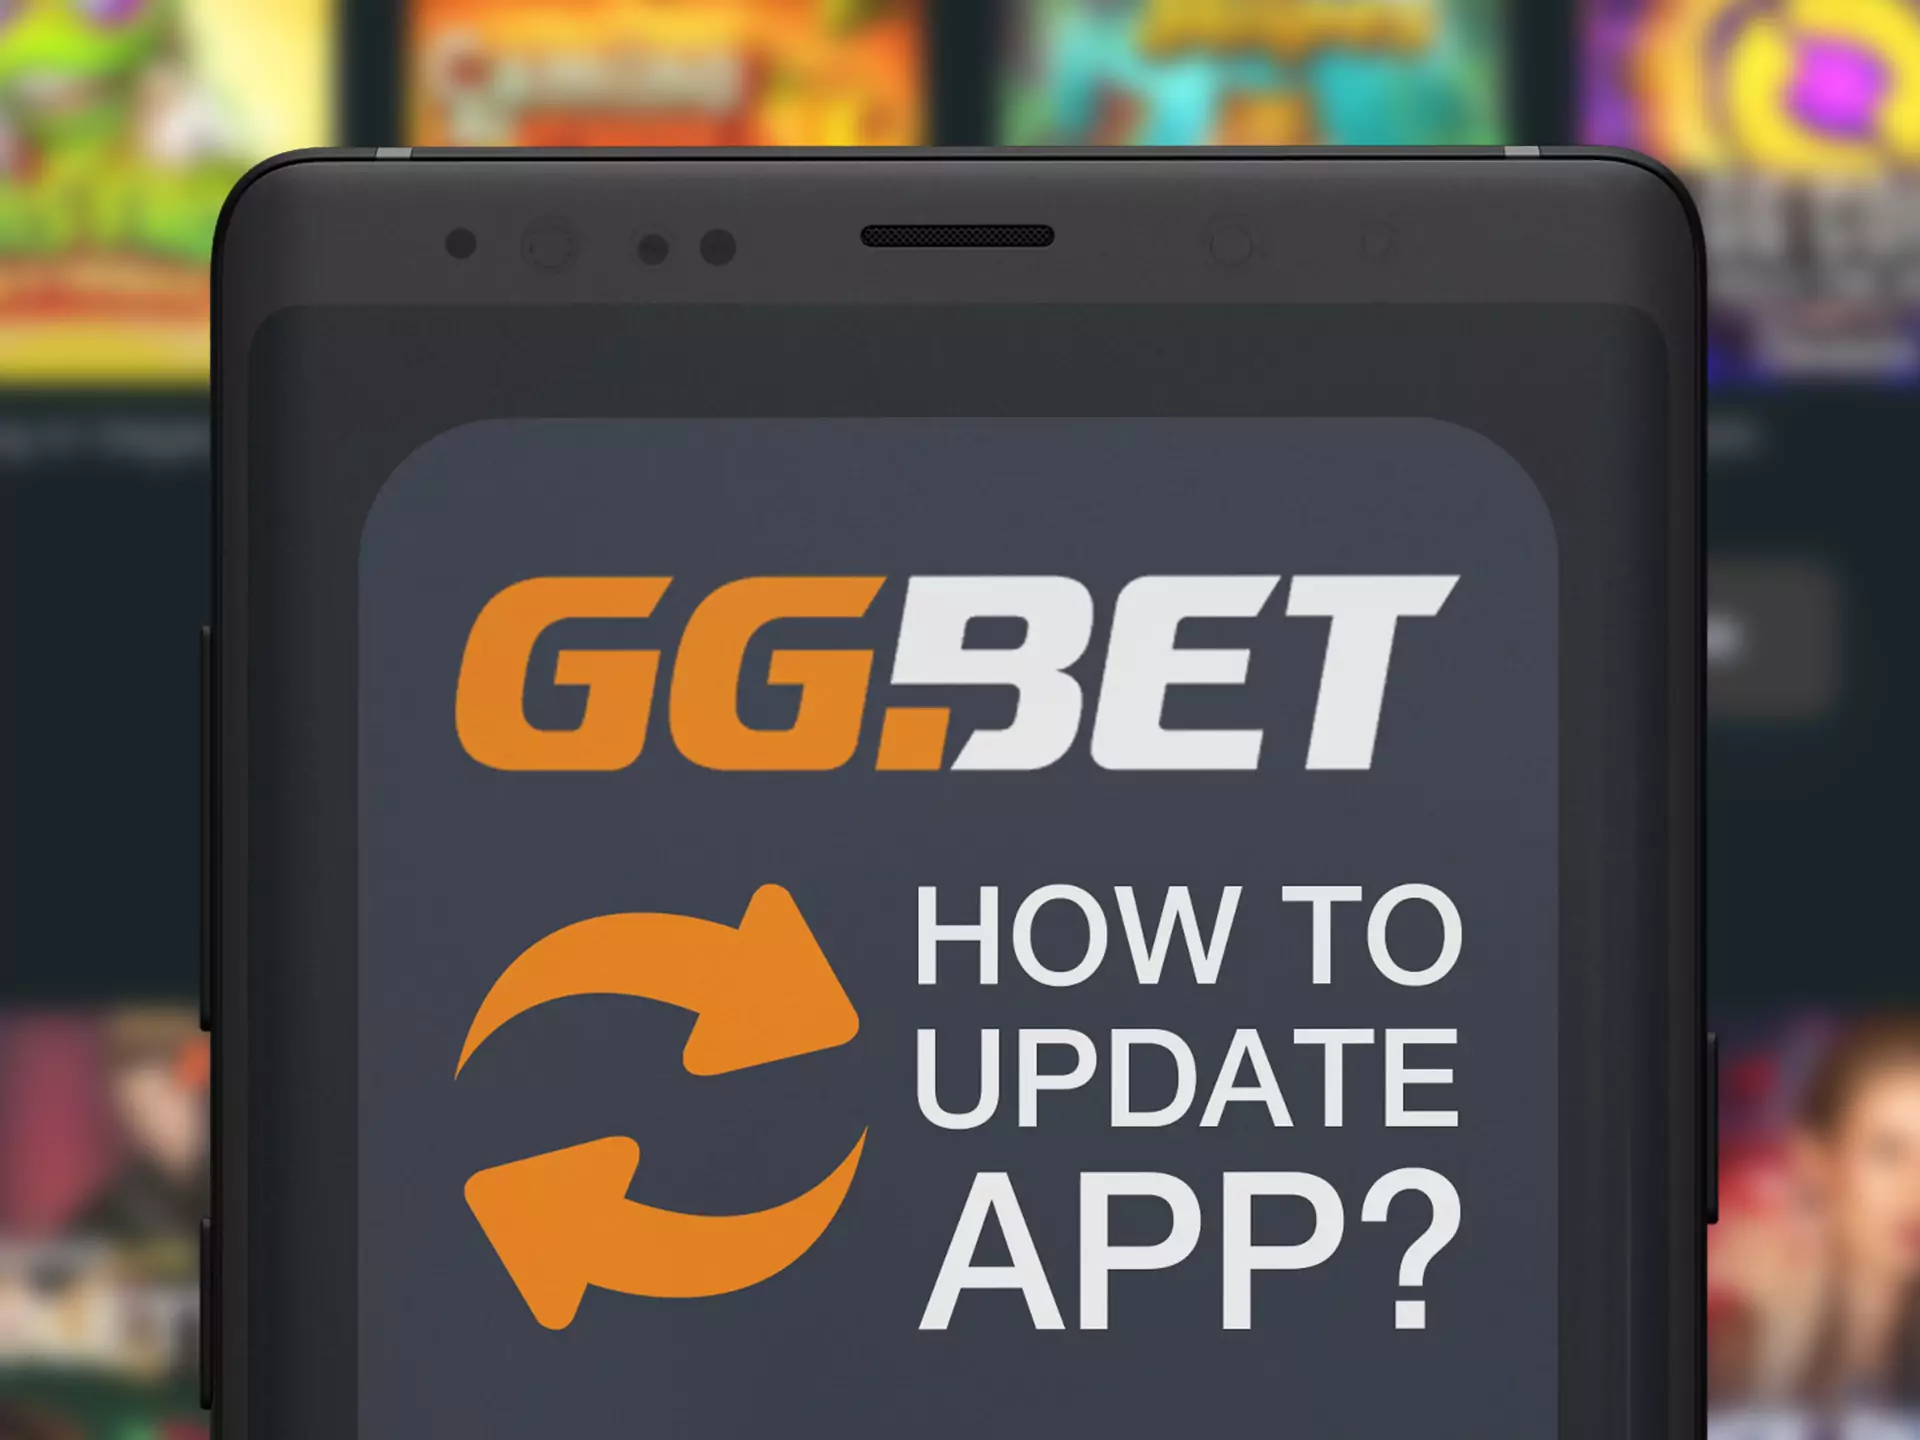 GGBet app can update automatically.